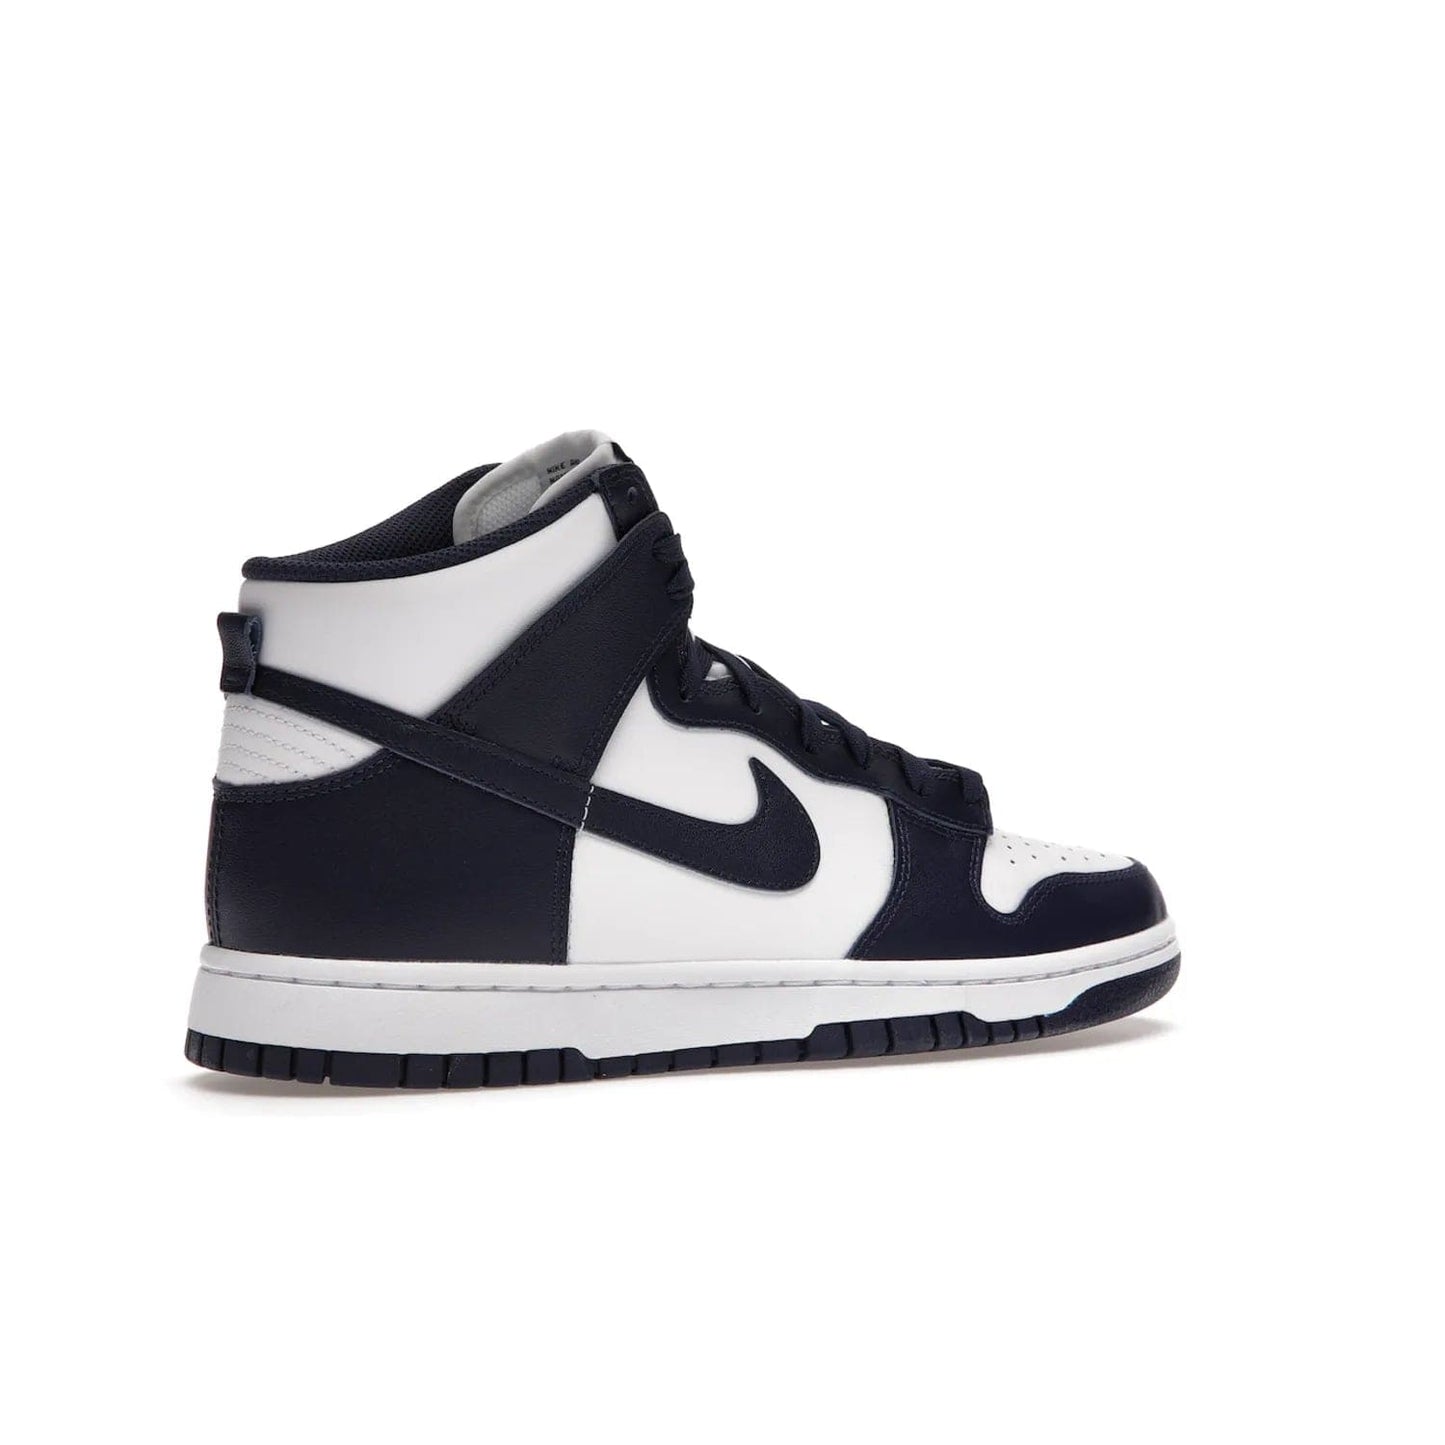 Nike Dunk High Championship Navy - Image 34 - Only at www.BallersClubKickz.com - Classic Nike Dunk High sneaker delivers an unforgettable style with white leather upper, Championship Navy overlays, and matching woven tongue label and sole. Make a statement with the Championship Navy today.